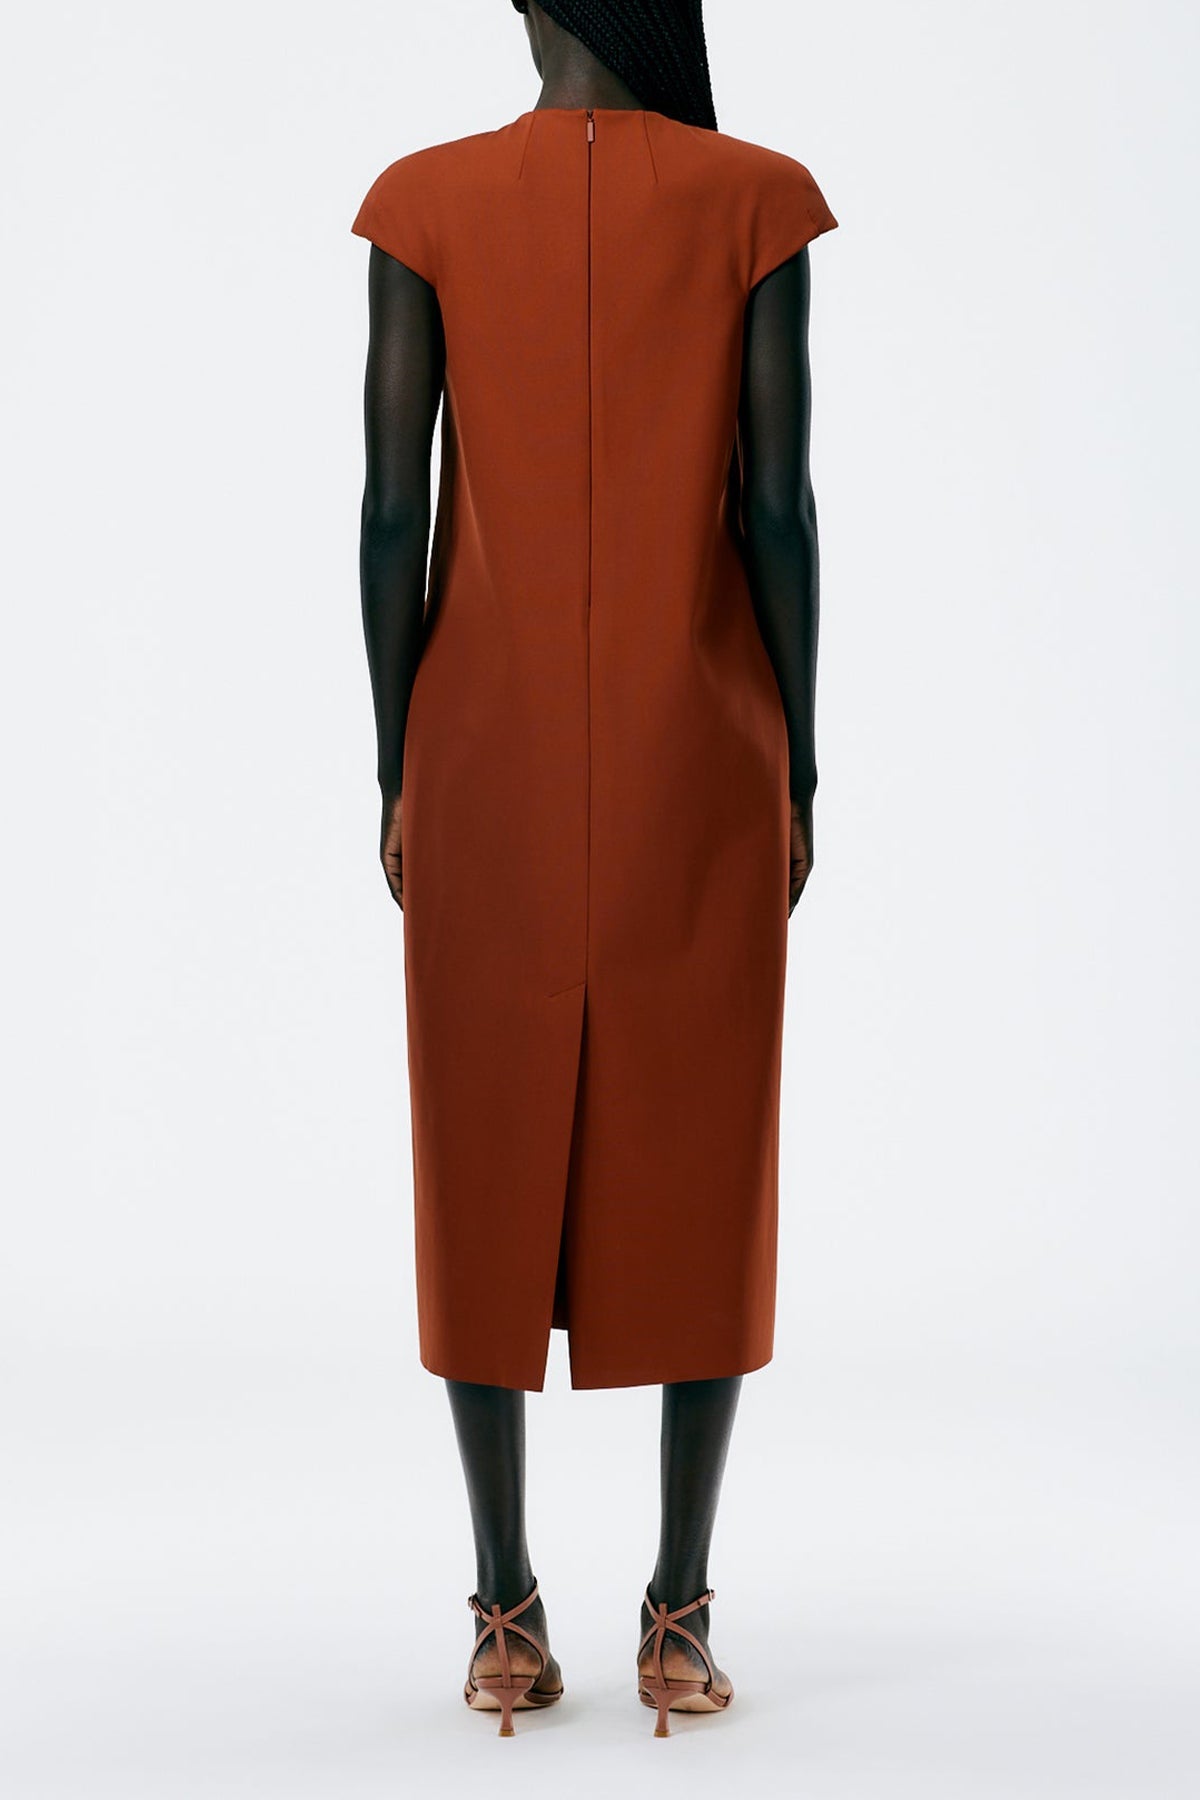 Compact Ultra Stretch Knit Lean Sleeveless Dress in Redwood - shop-olivia.com